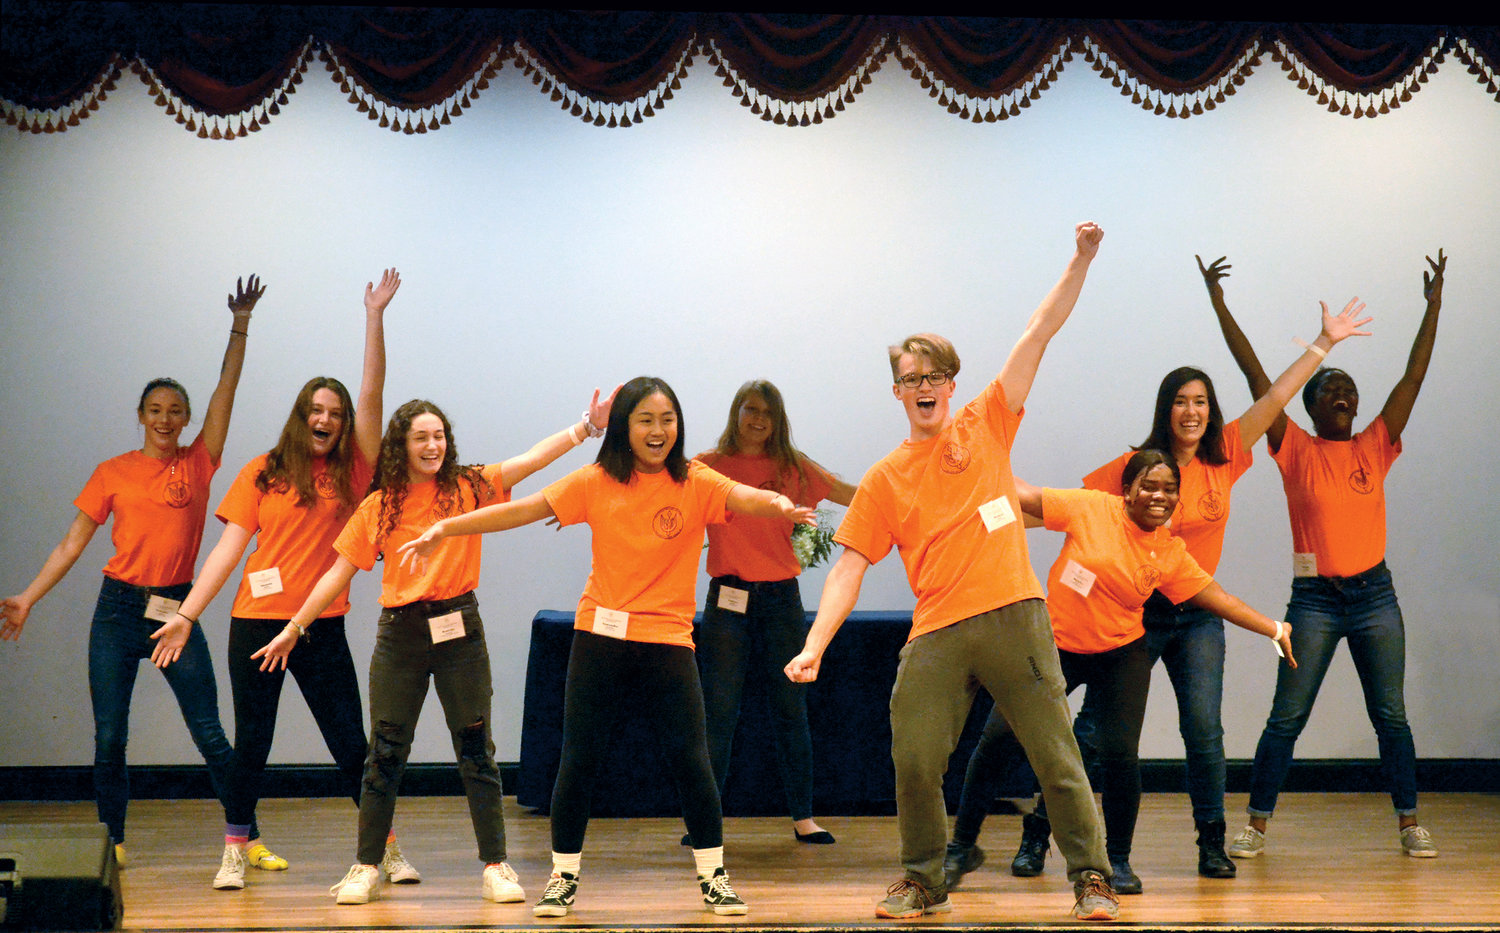 The outgoing and incoming board members perform a dance to open the 58th annual Pallottine Teenage Federation Conference at Honor’s Haven Resort and Spa in Ellenville Dec. 6.